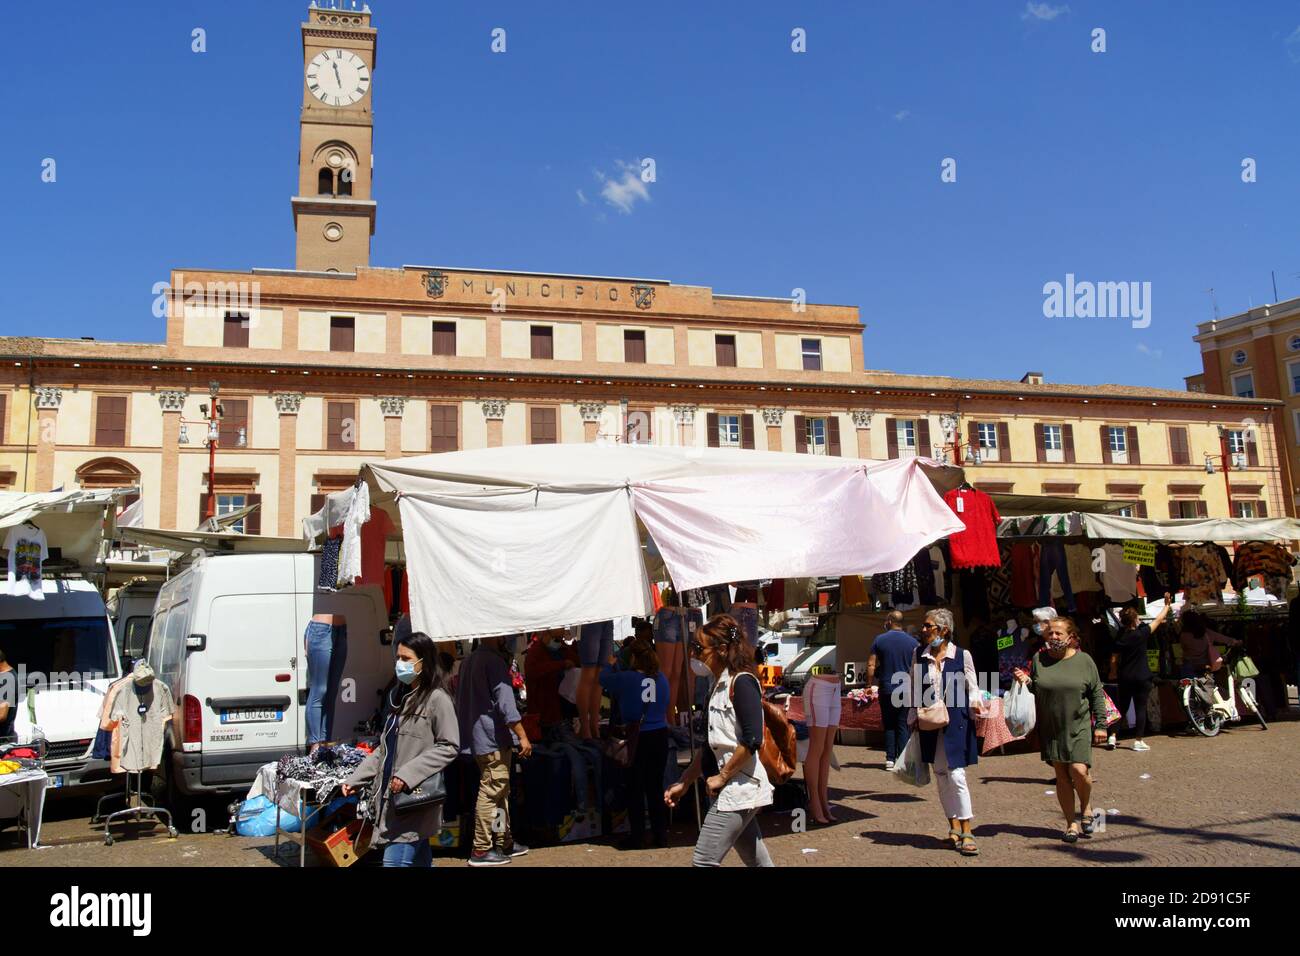 Forlì, Italy - June 1, 2020: Piazza Aurelio Saffi (Aurelio Saffi Square) in downtown during a street market day. A lot of people around wearing protec Stock Photo